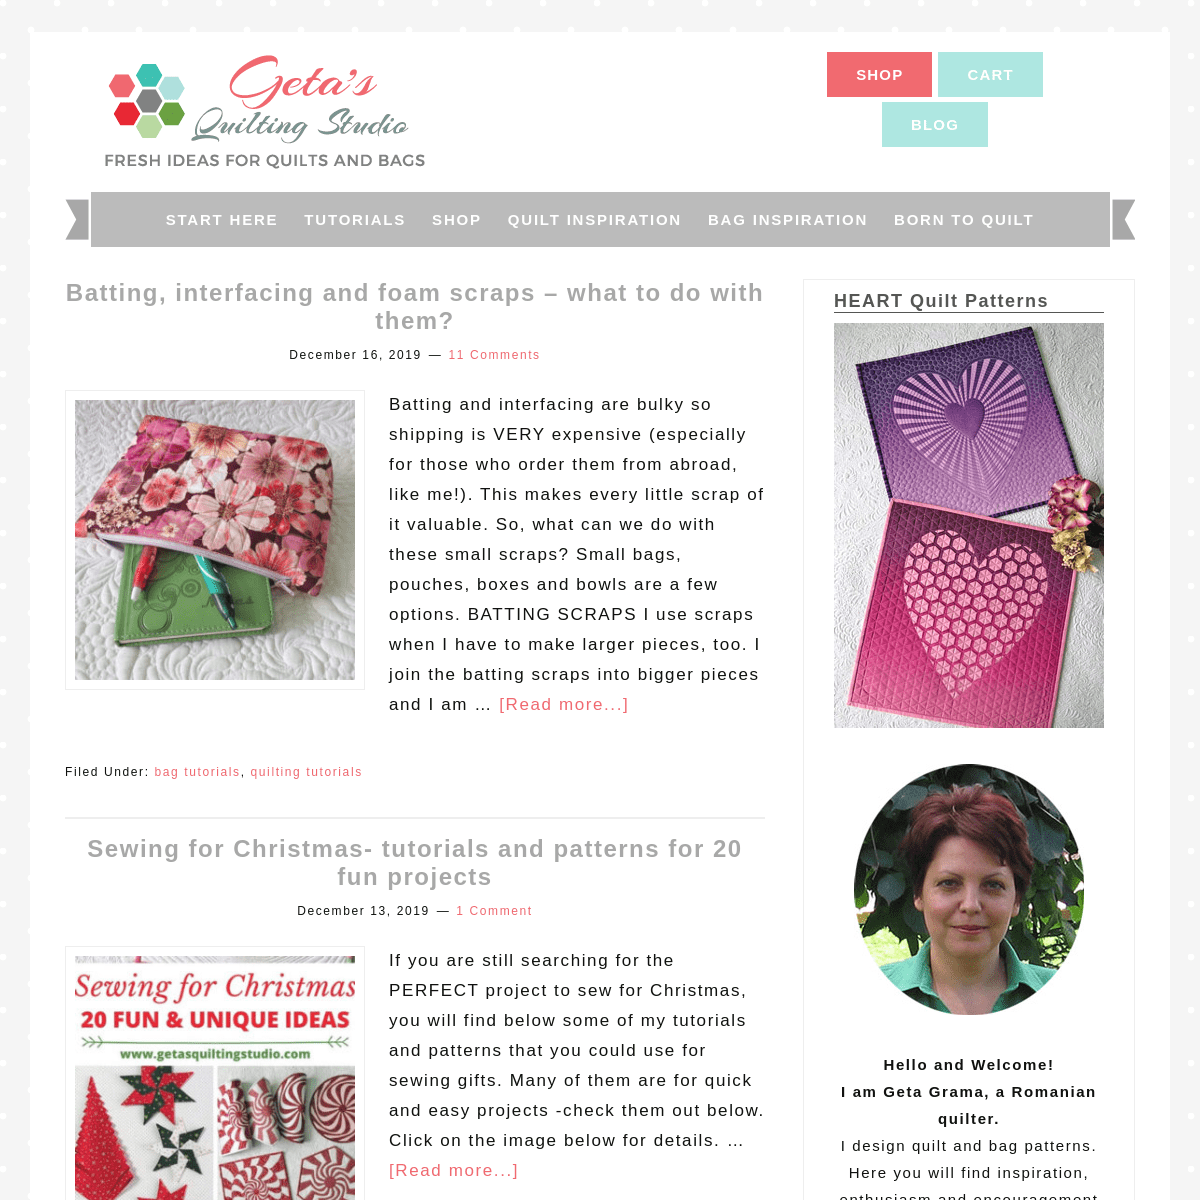 Geta's Quilting Studio - Fresh Ideas for Quilts and Bags